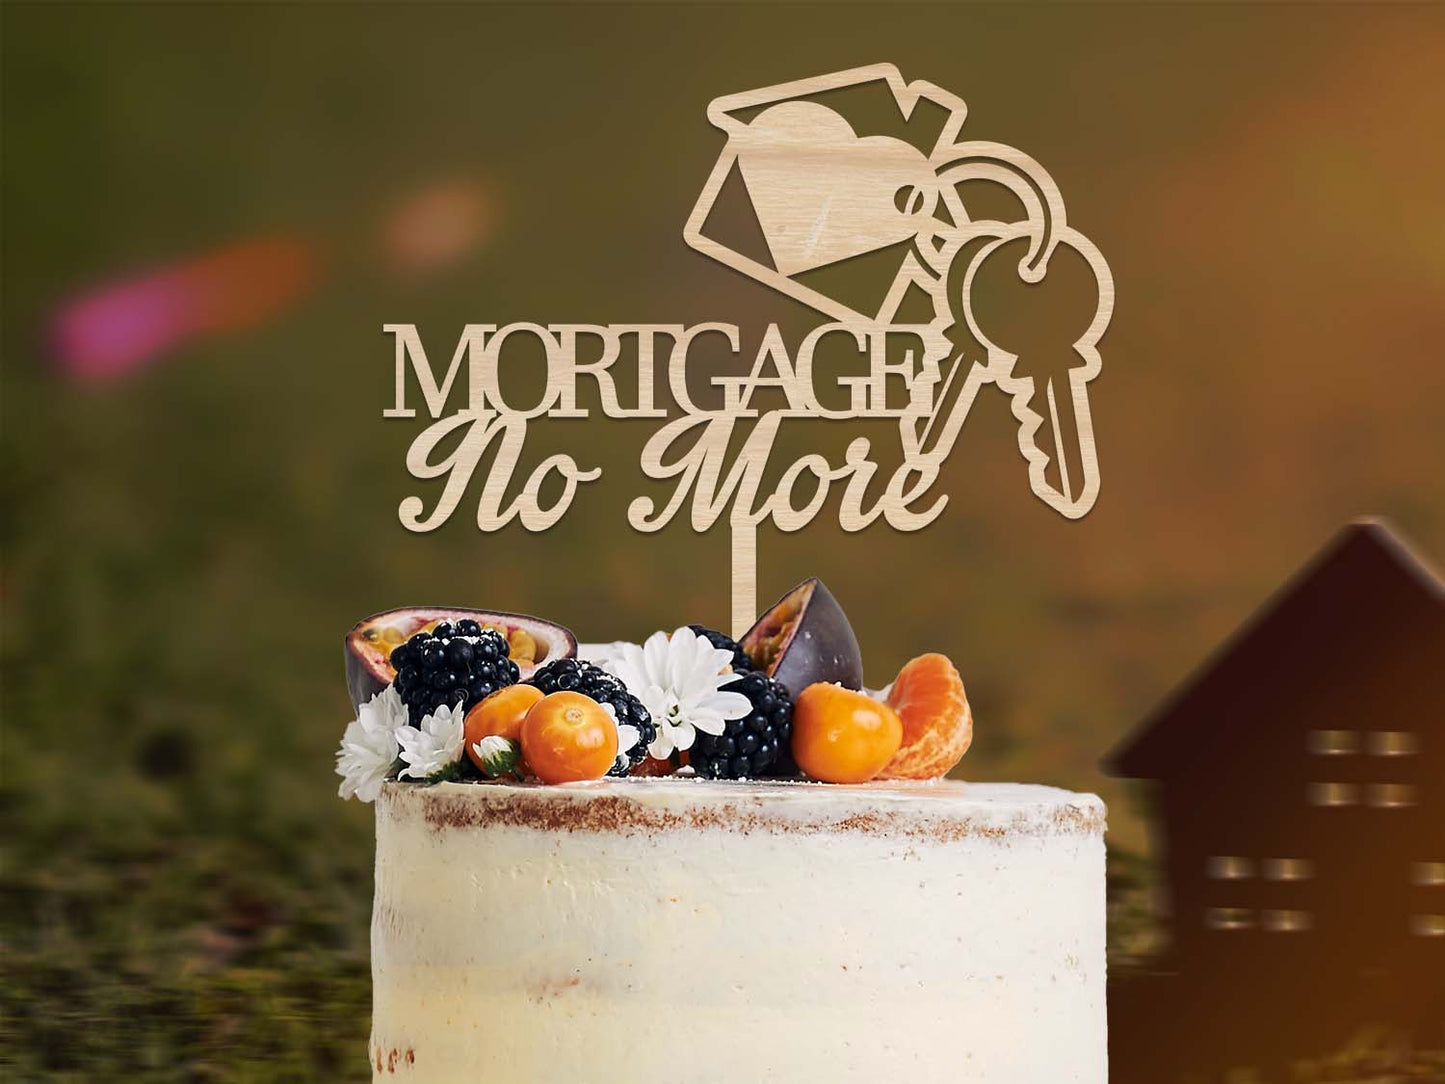 Mortgage No More New Home Owners Cake Topper Ireland